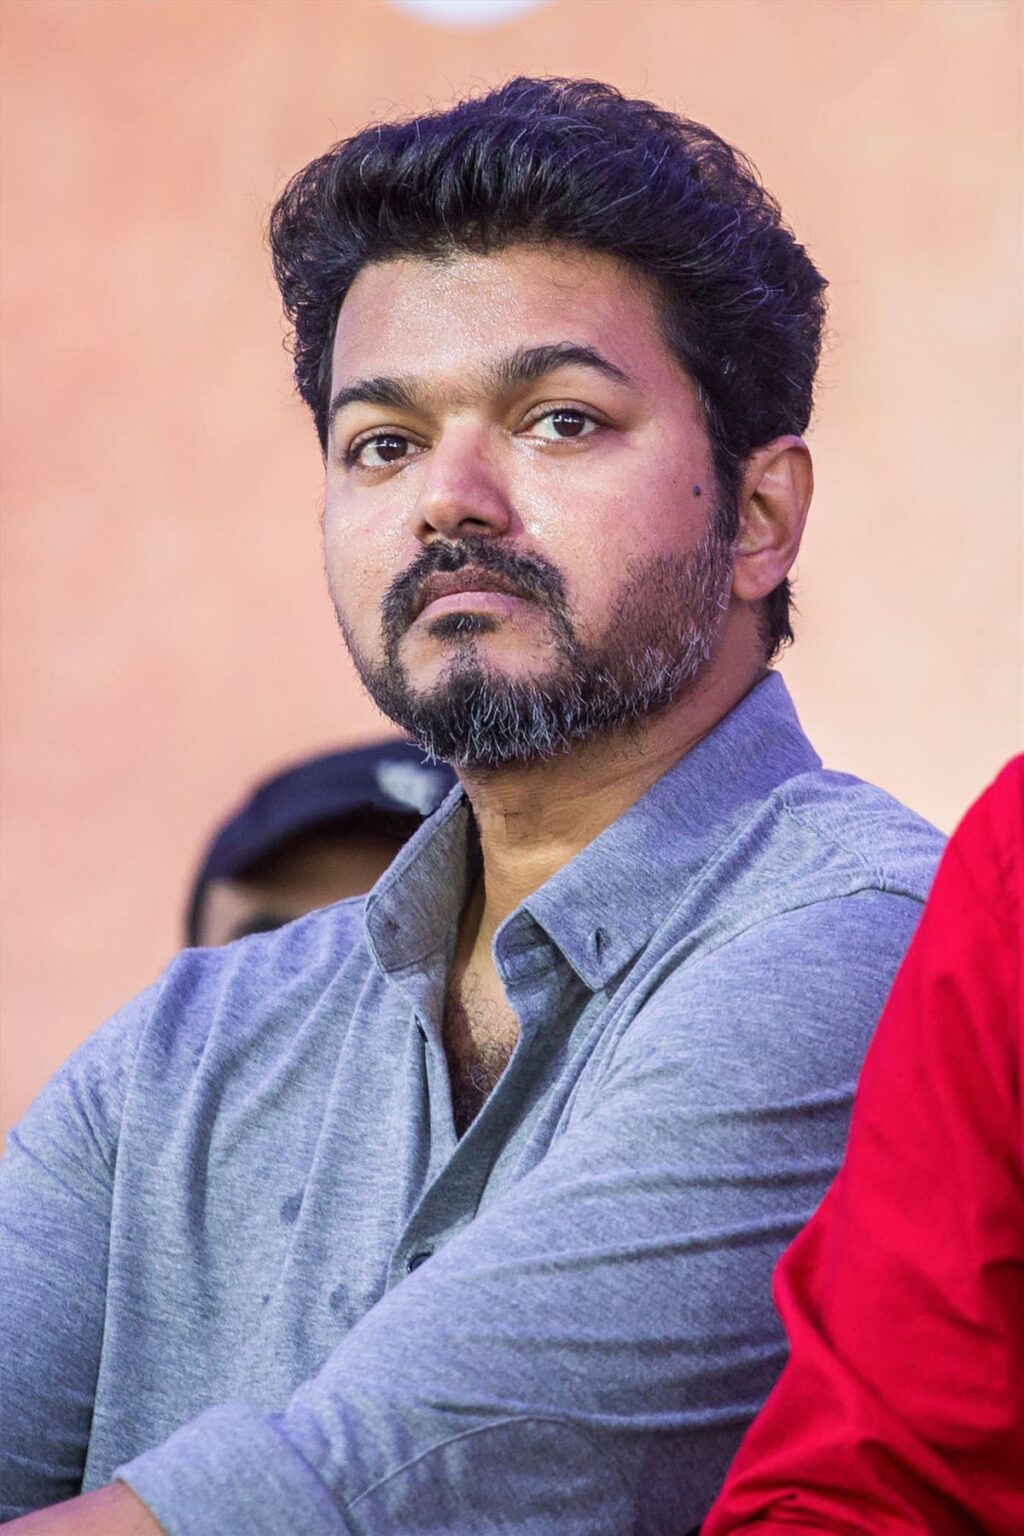 Ilaya Thalapathy Vijay is a renowned actor in India, and he's becoming one of the most popular actors in the world. Meet your new favorite today.